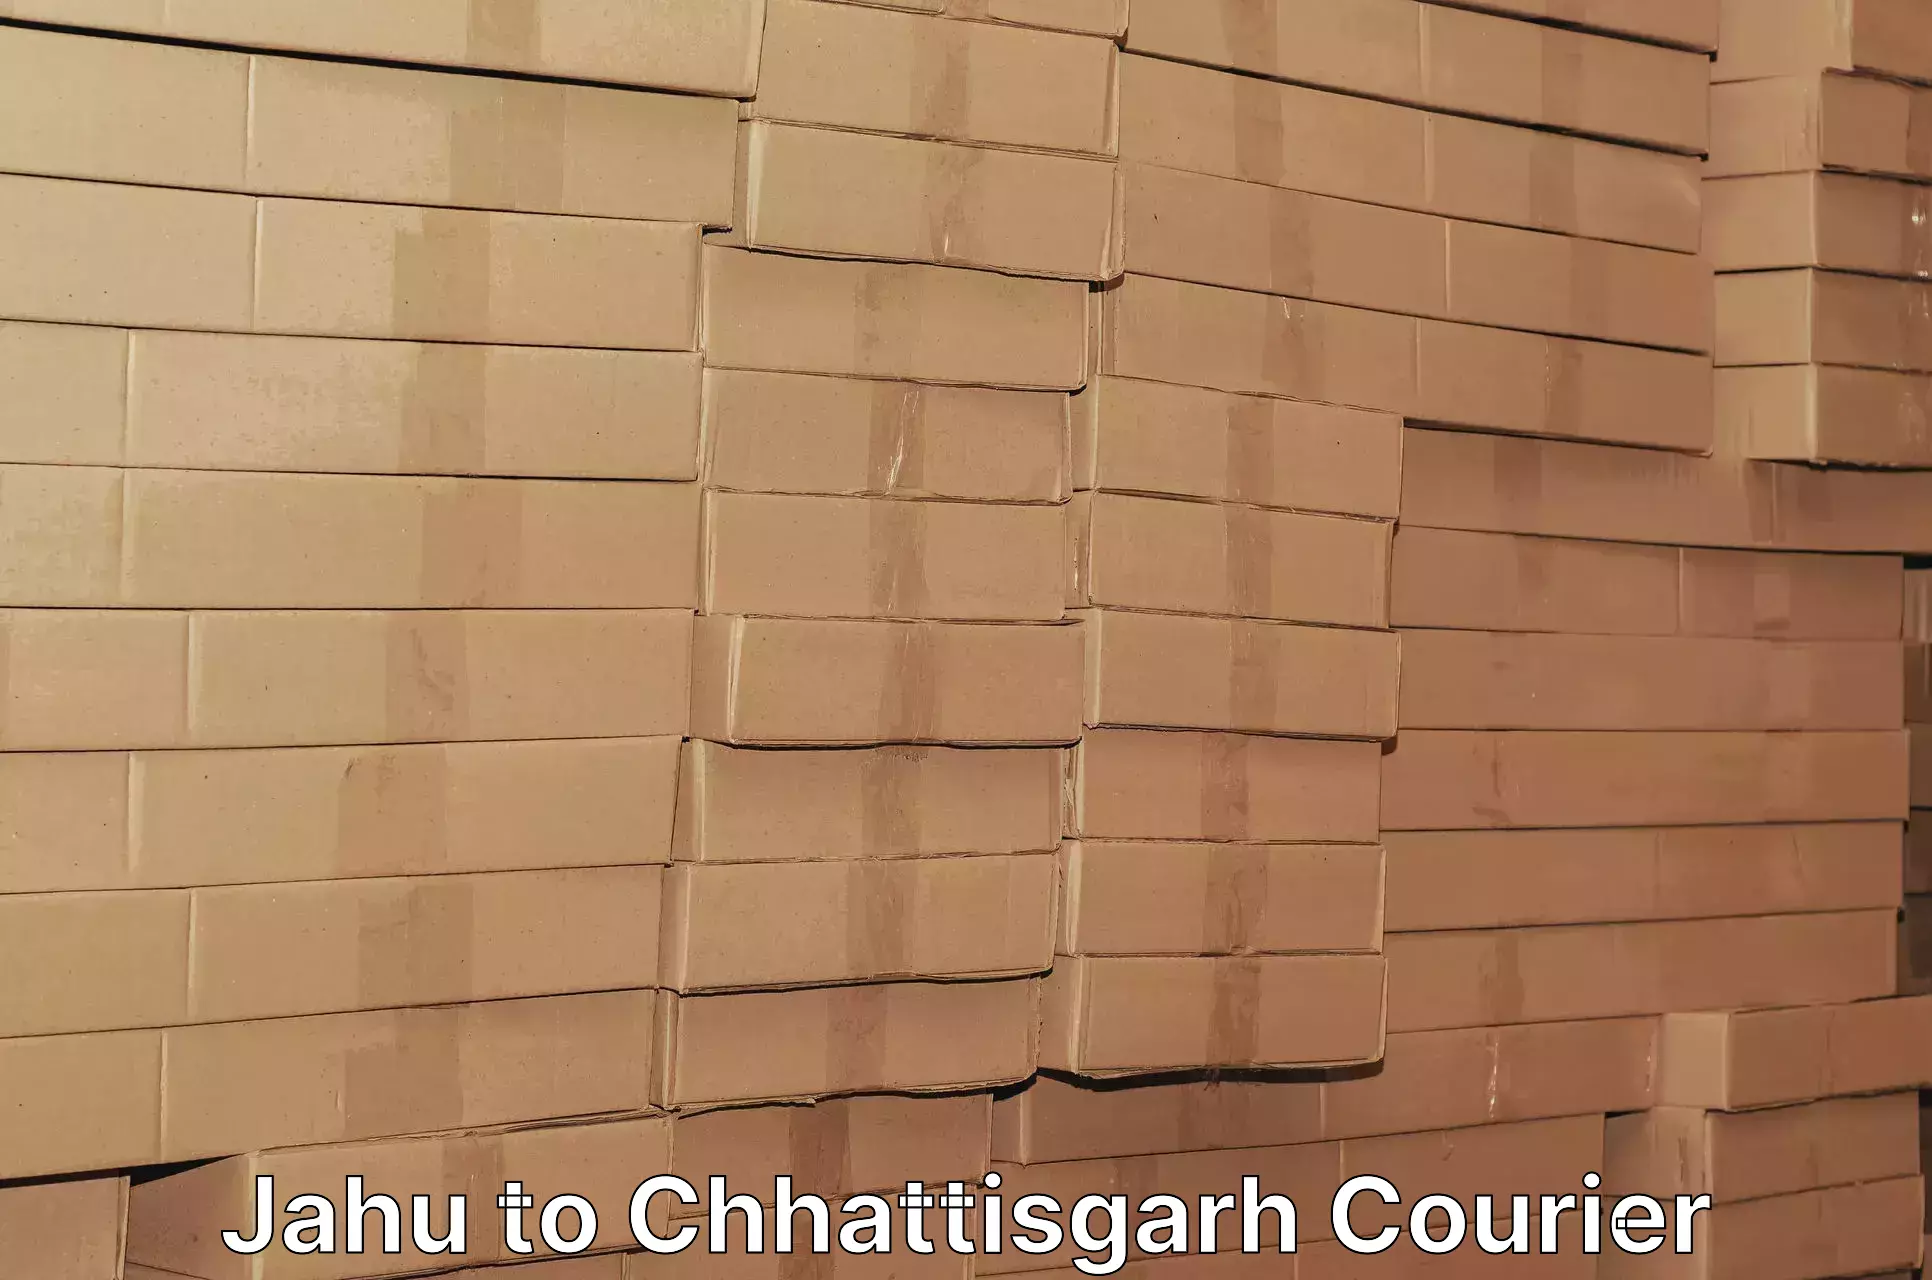 Package delivery network Jahu to Chhattisgarh